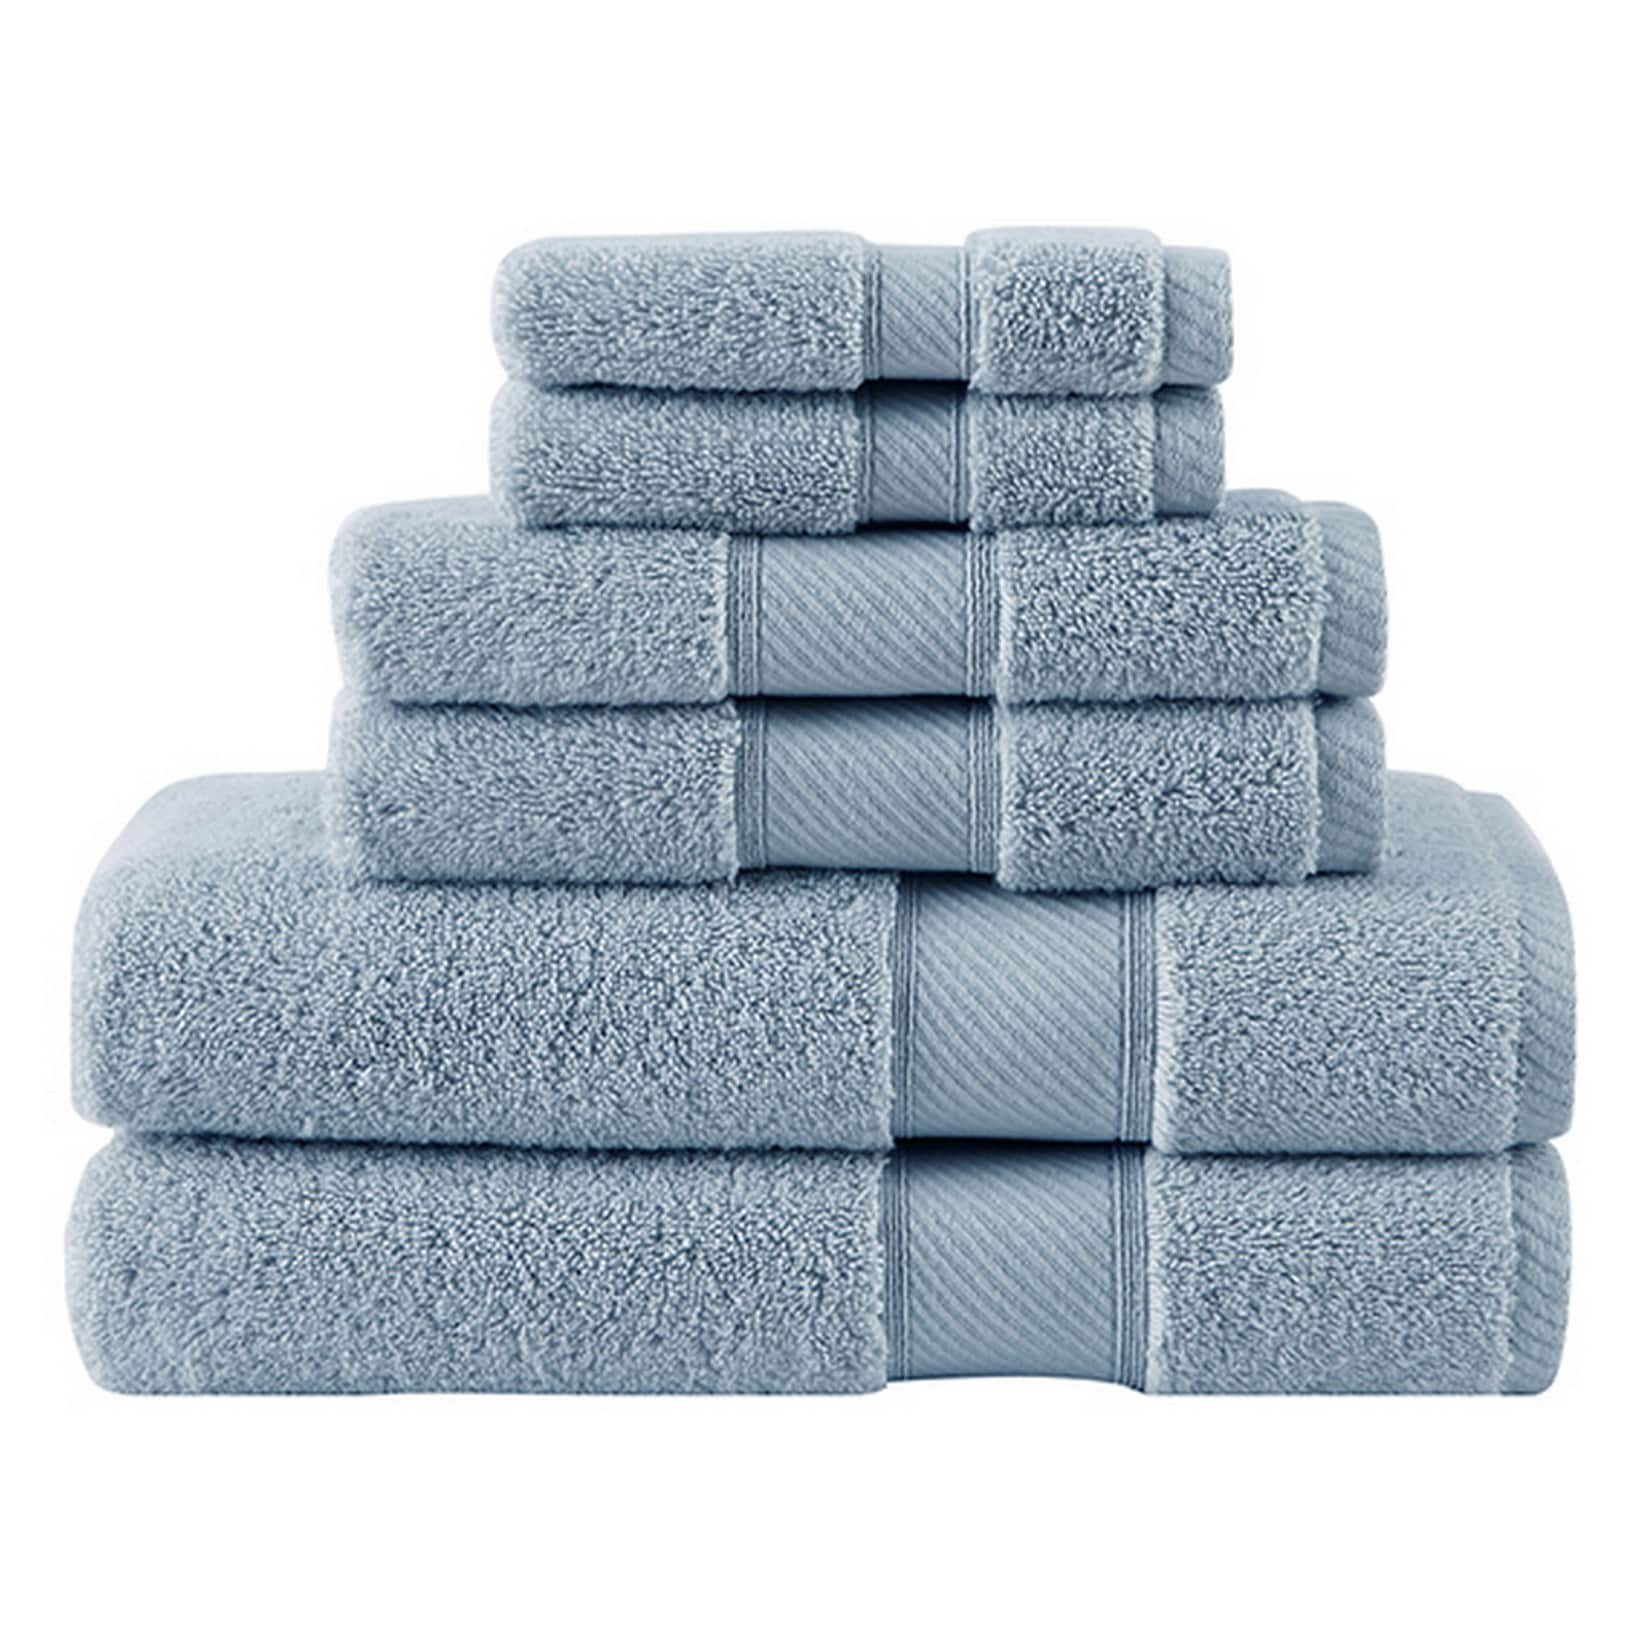 https://ak1.ostkcdn.com/images/products/17982488/Charisma-Classic-II-Towel-Collection-Bath-Hand-Wash-Towel-Sold-Seperately-245479d9-f3f1-47d2-9ece-04bf3f4c522b.jpg